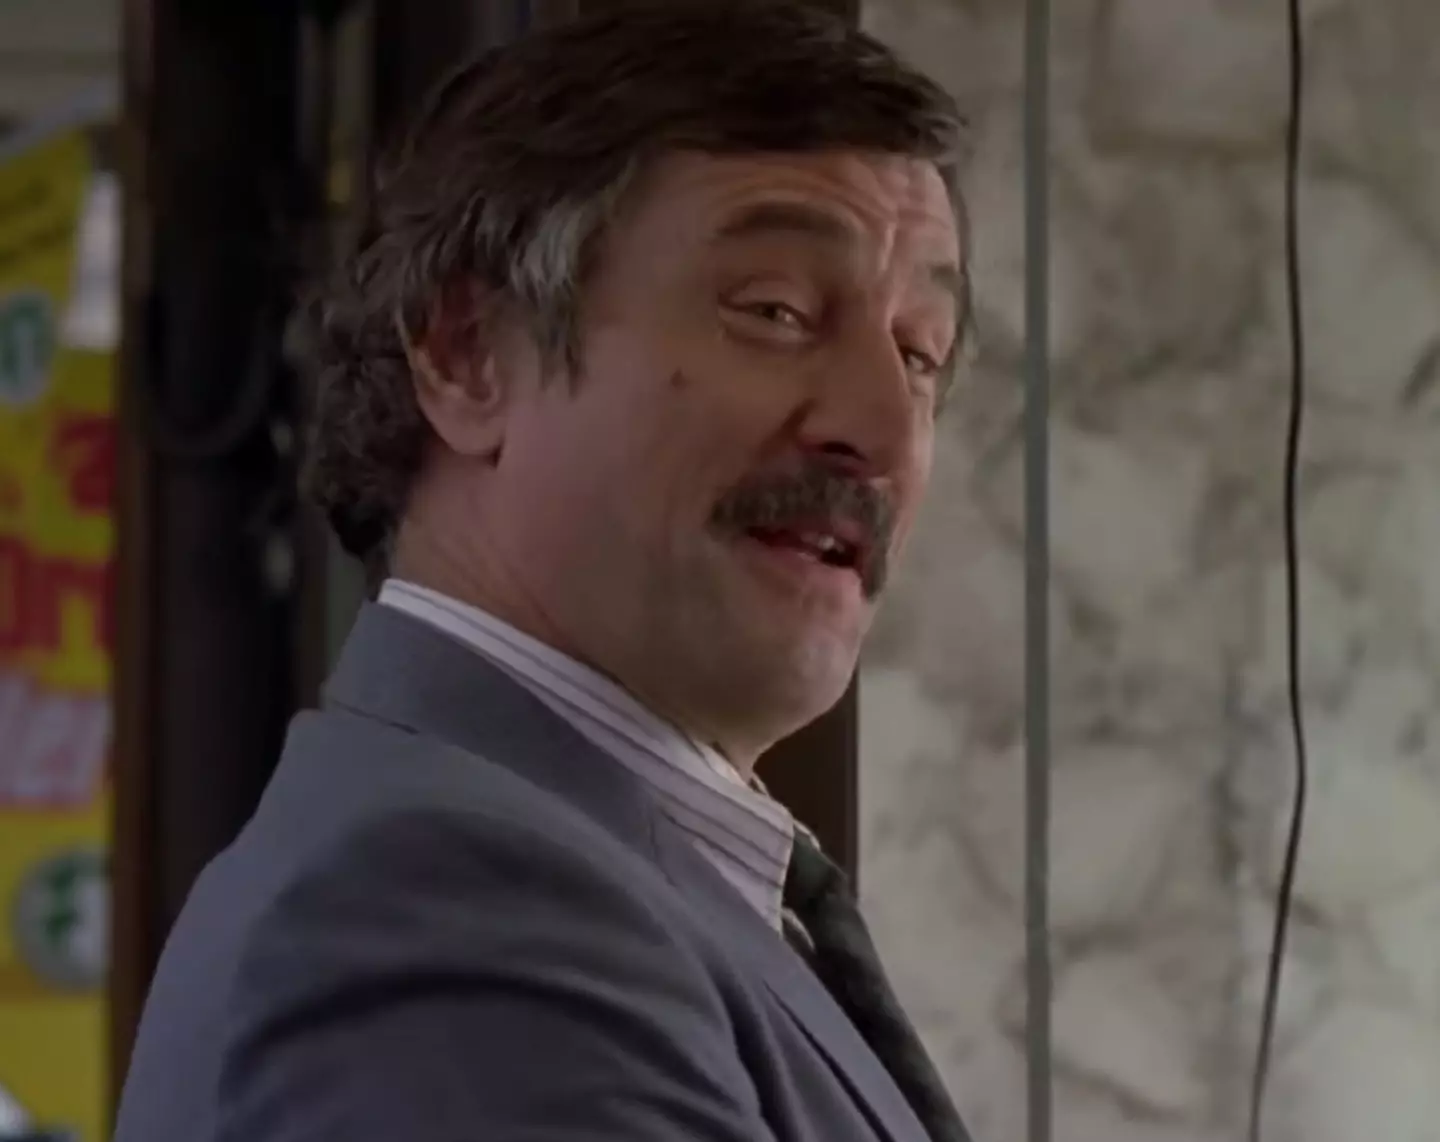 If Robert De Niro's 'stache doesn't convince you to watch then what will?